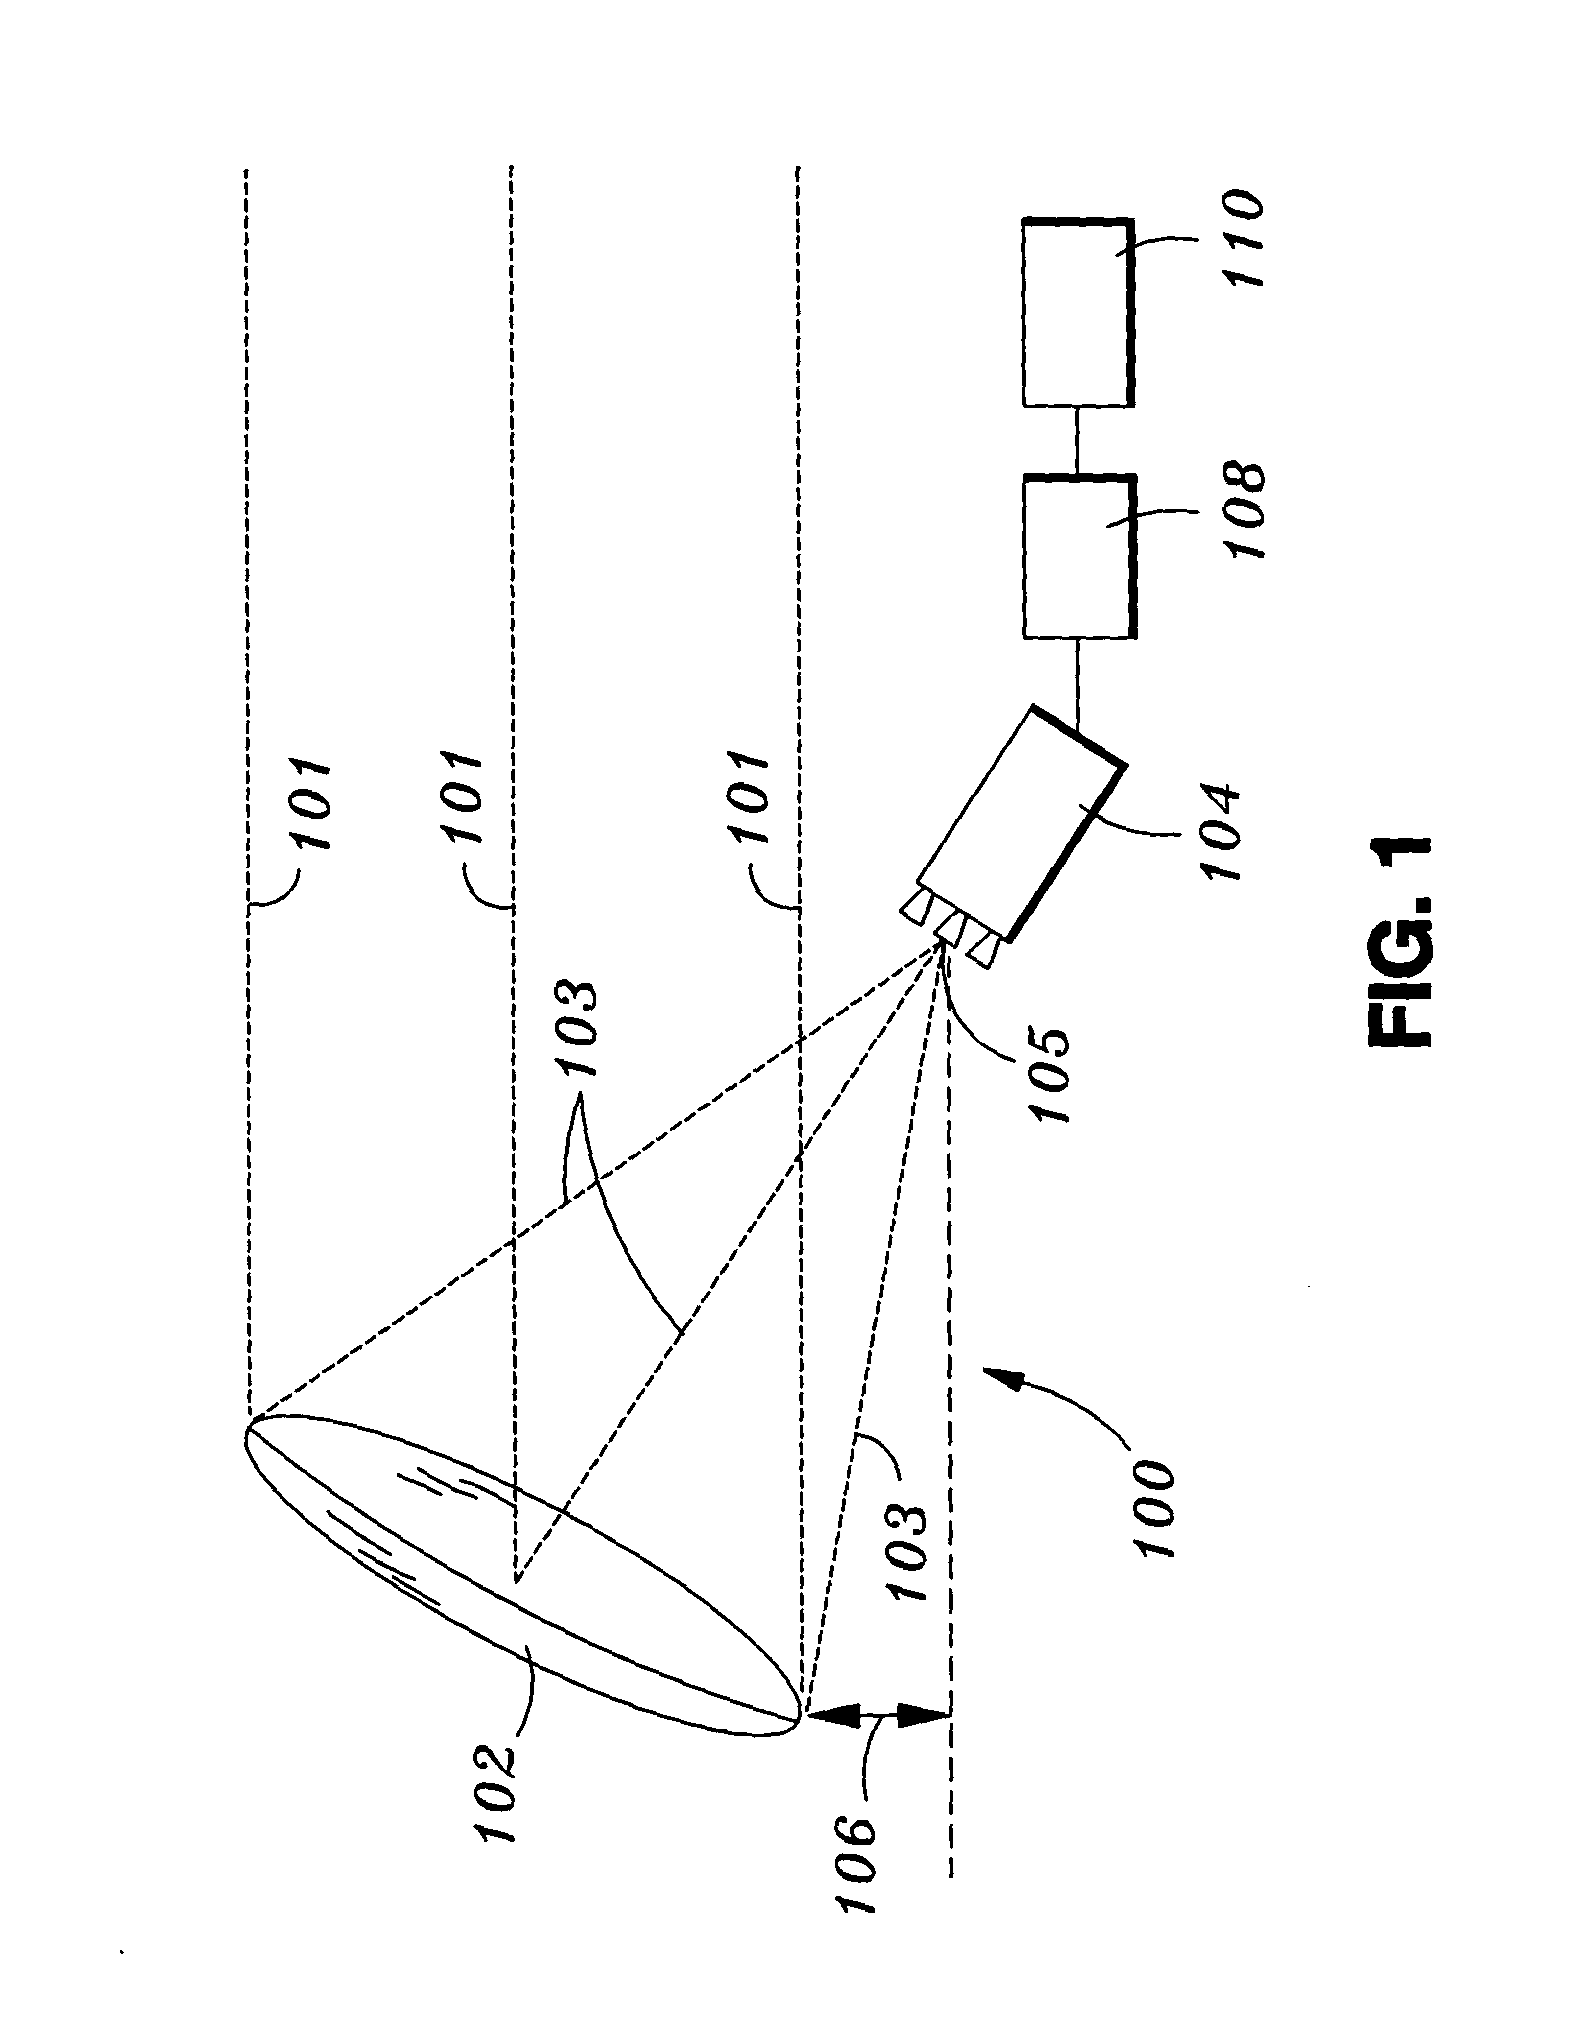 Multi-beam and multi-band antenna system for communication satellites